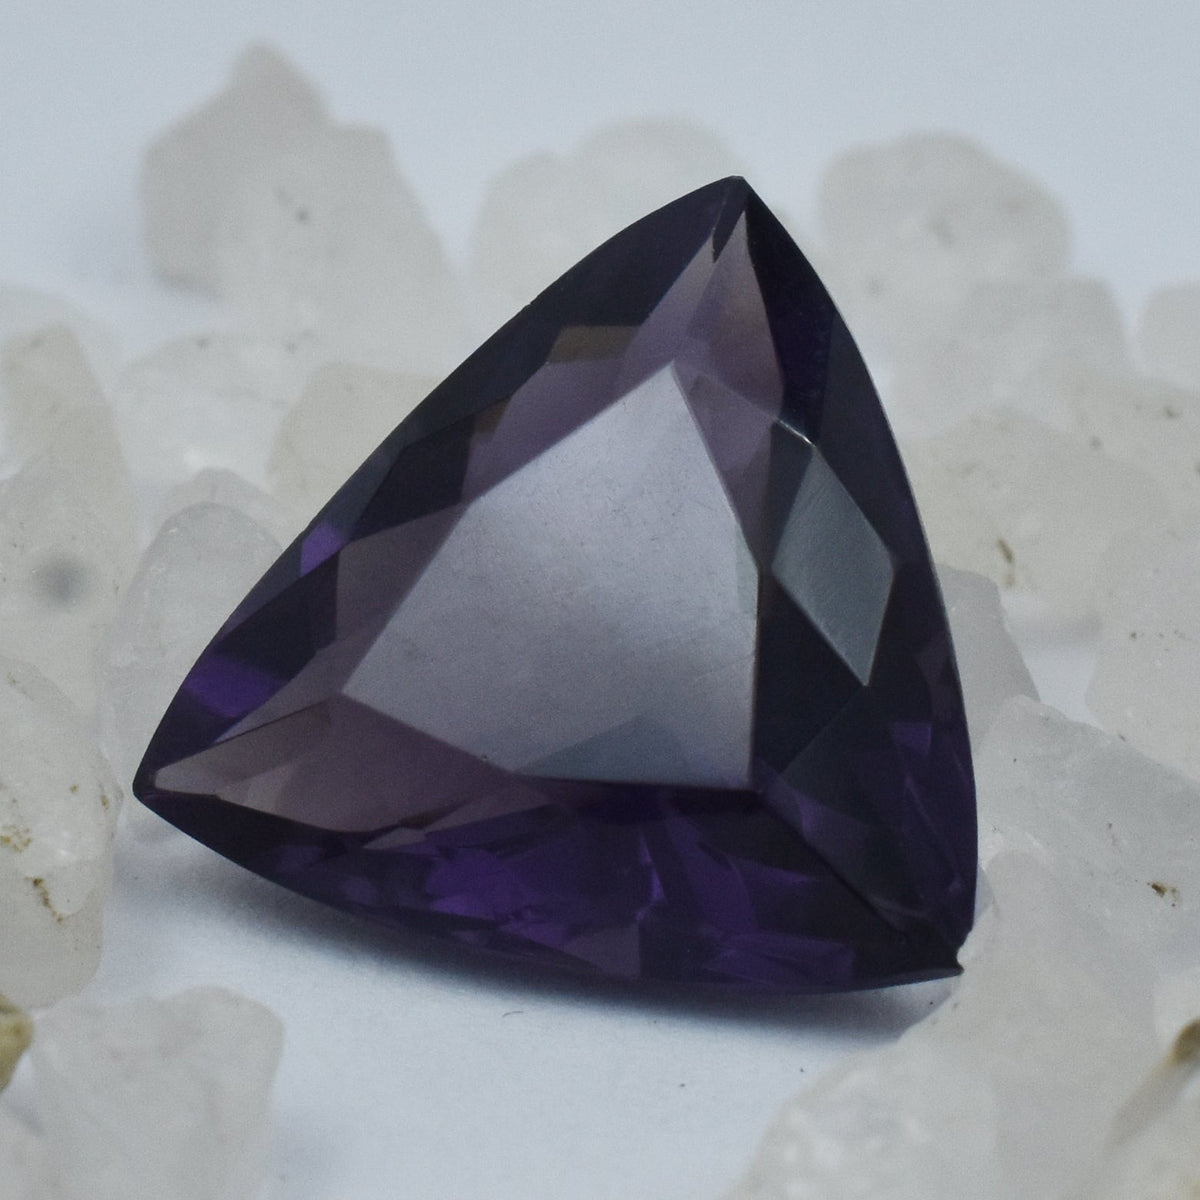 Glamourize Natural Amethyst 61.32 Carat Purple Color Amethyst Trillion Shape CERTIFIED Loose Gemstone | Amethyst Necklace | AAA+ Quality Gemstone | Best Offer